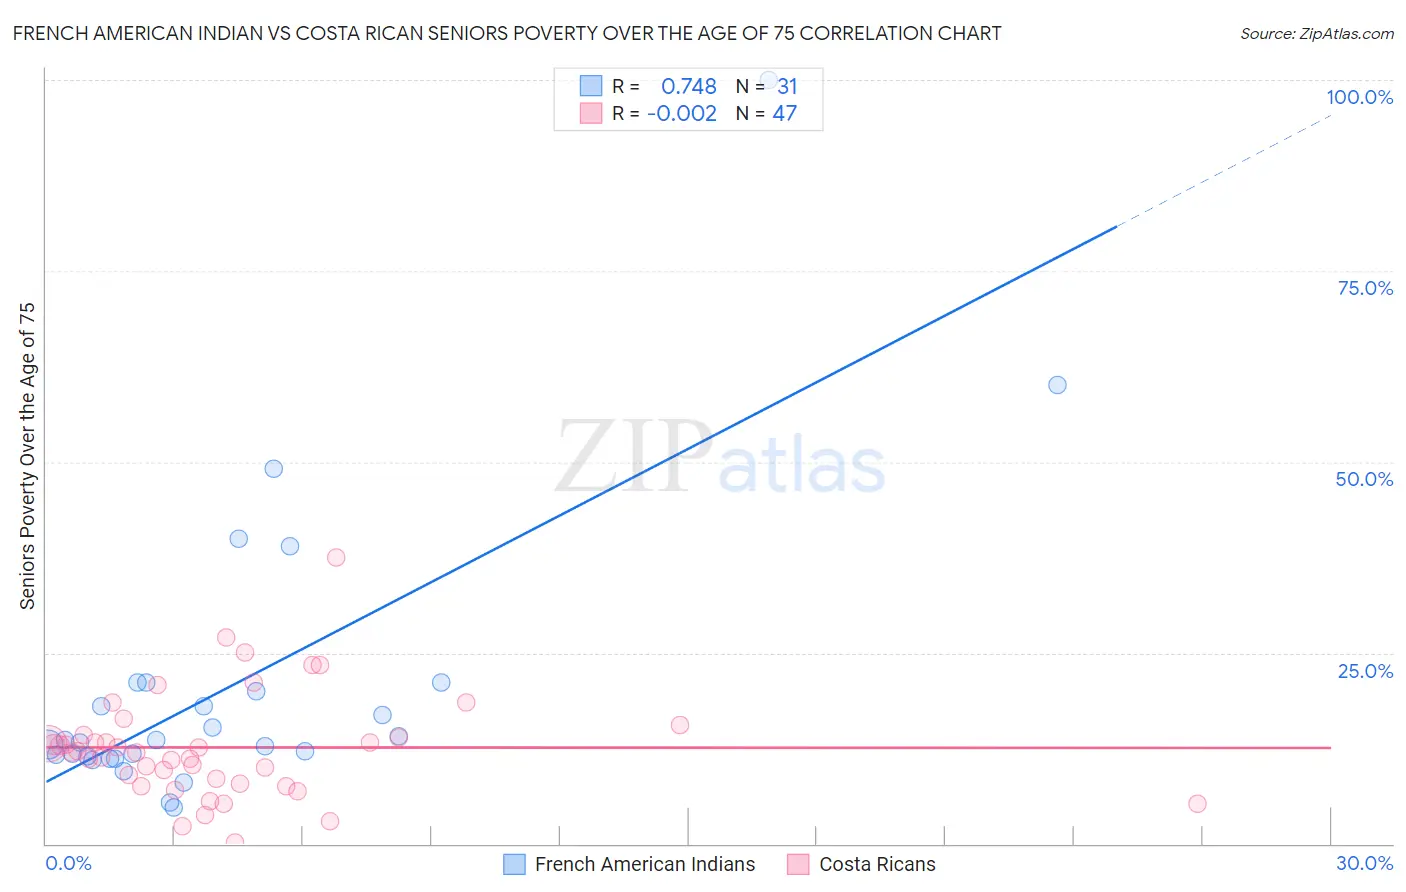 French American Indian vs Costa Rican Seniors Poverty Over the Age of 75